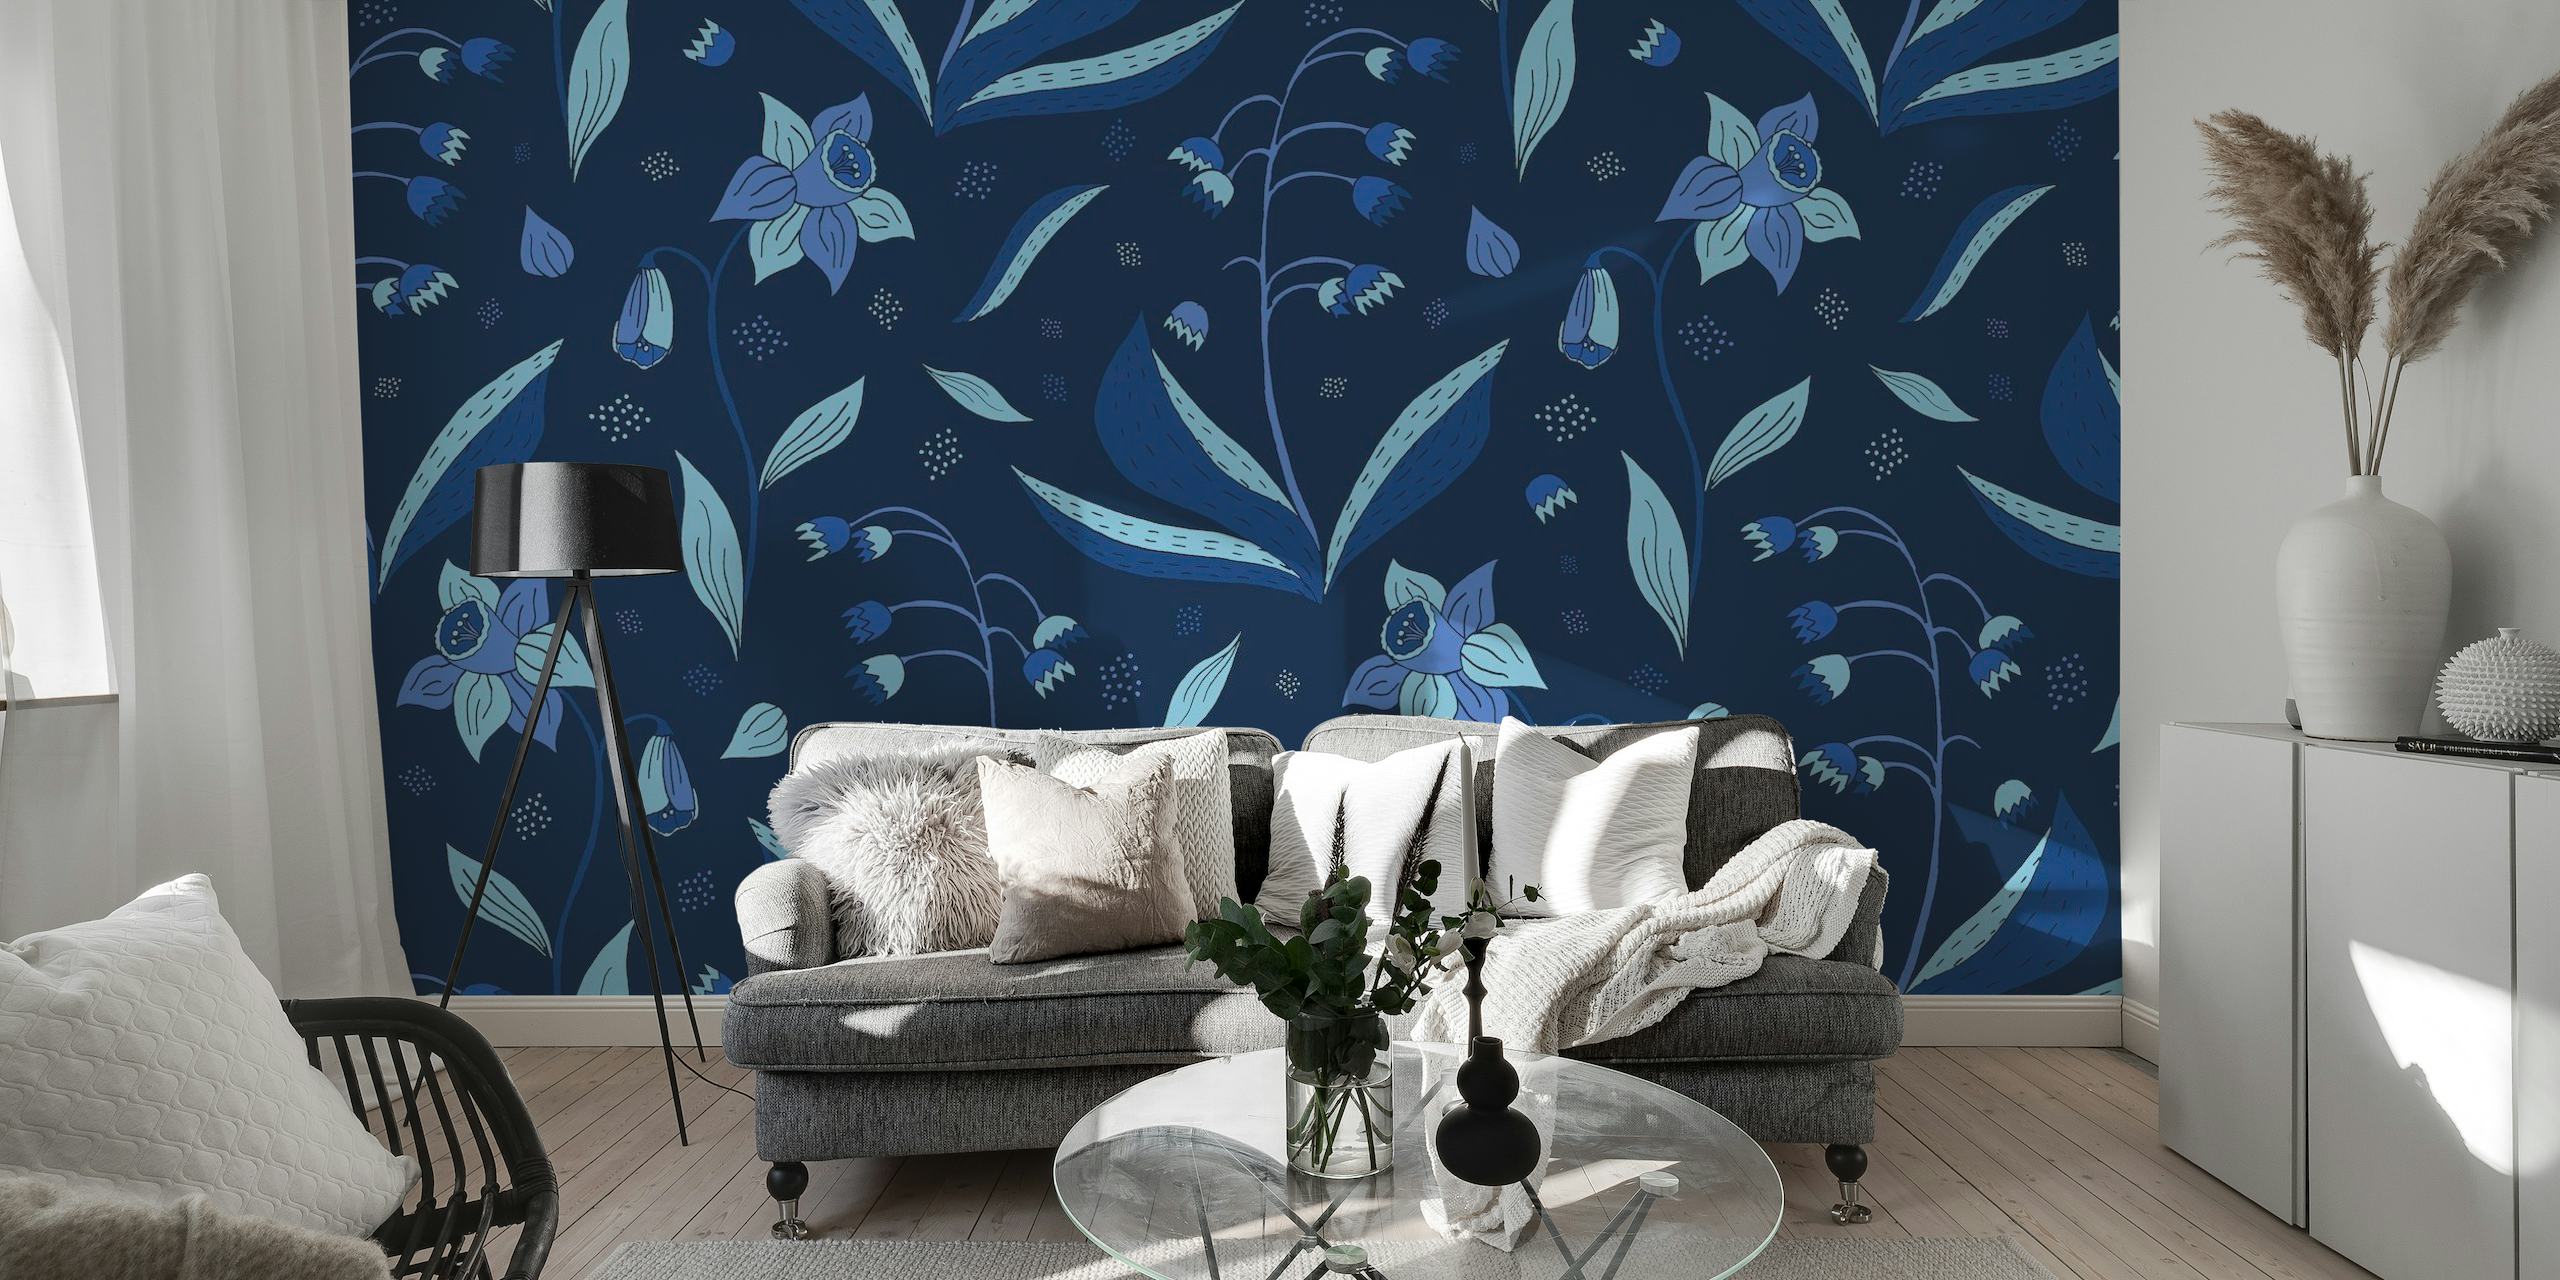 Midnight Blue Garden wall mural with floral patterns